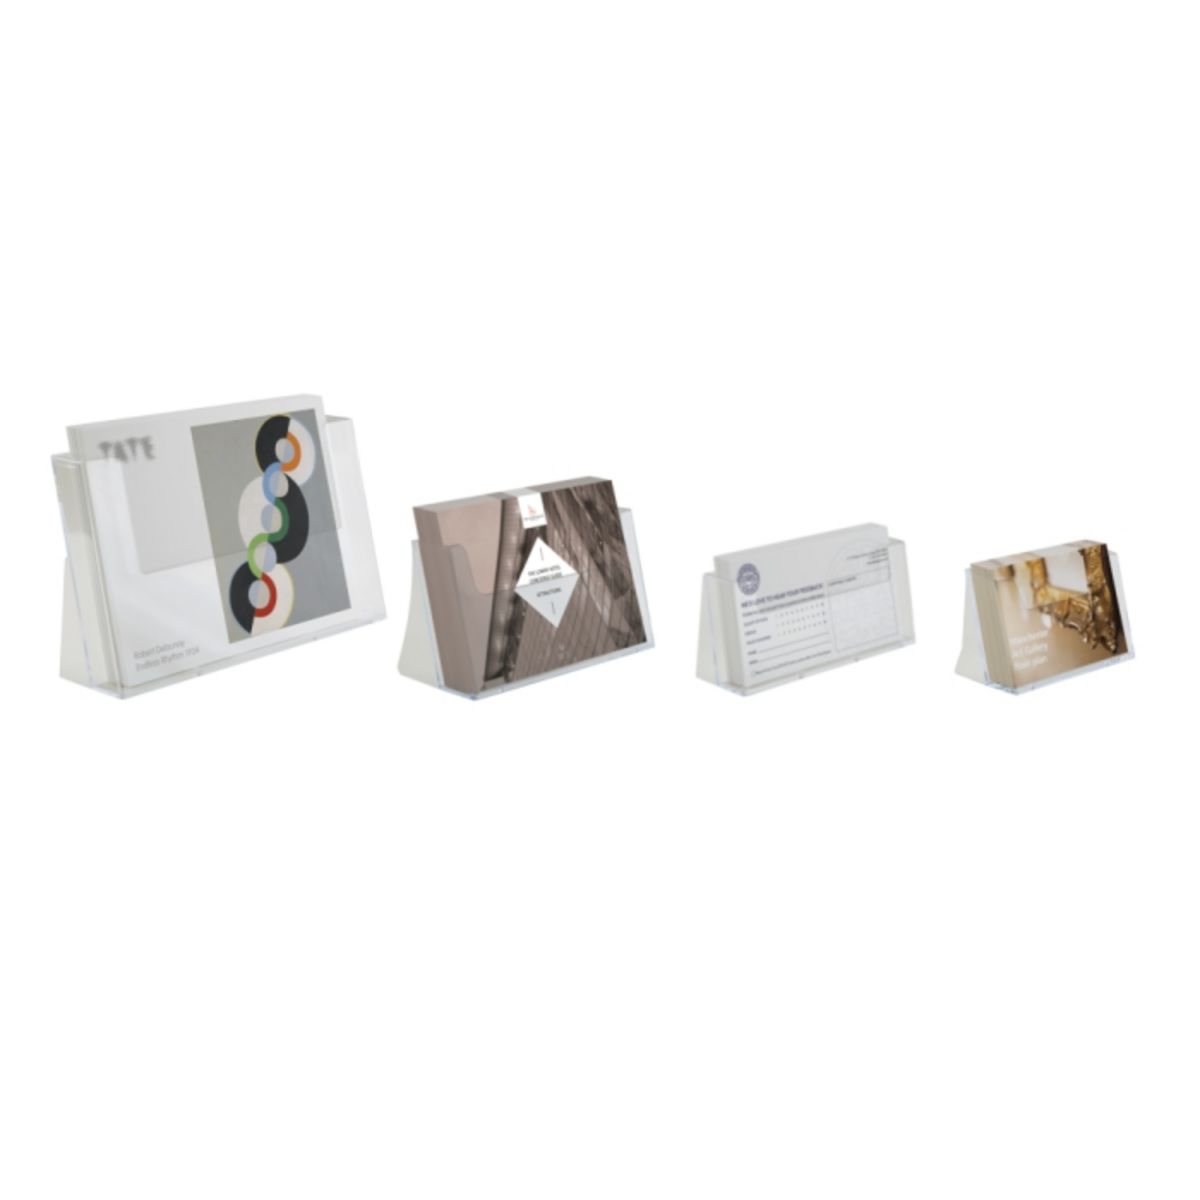 Landscape countertop leaflet holders in A4, A5, 1 3rd A4 and A6.png